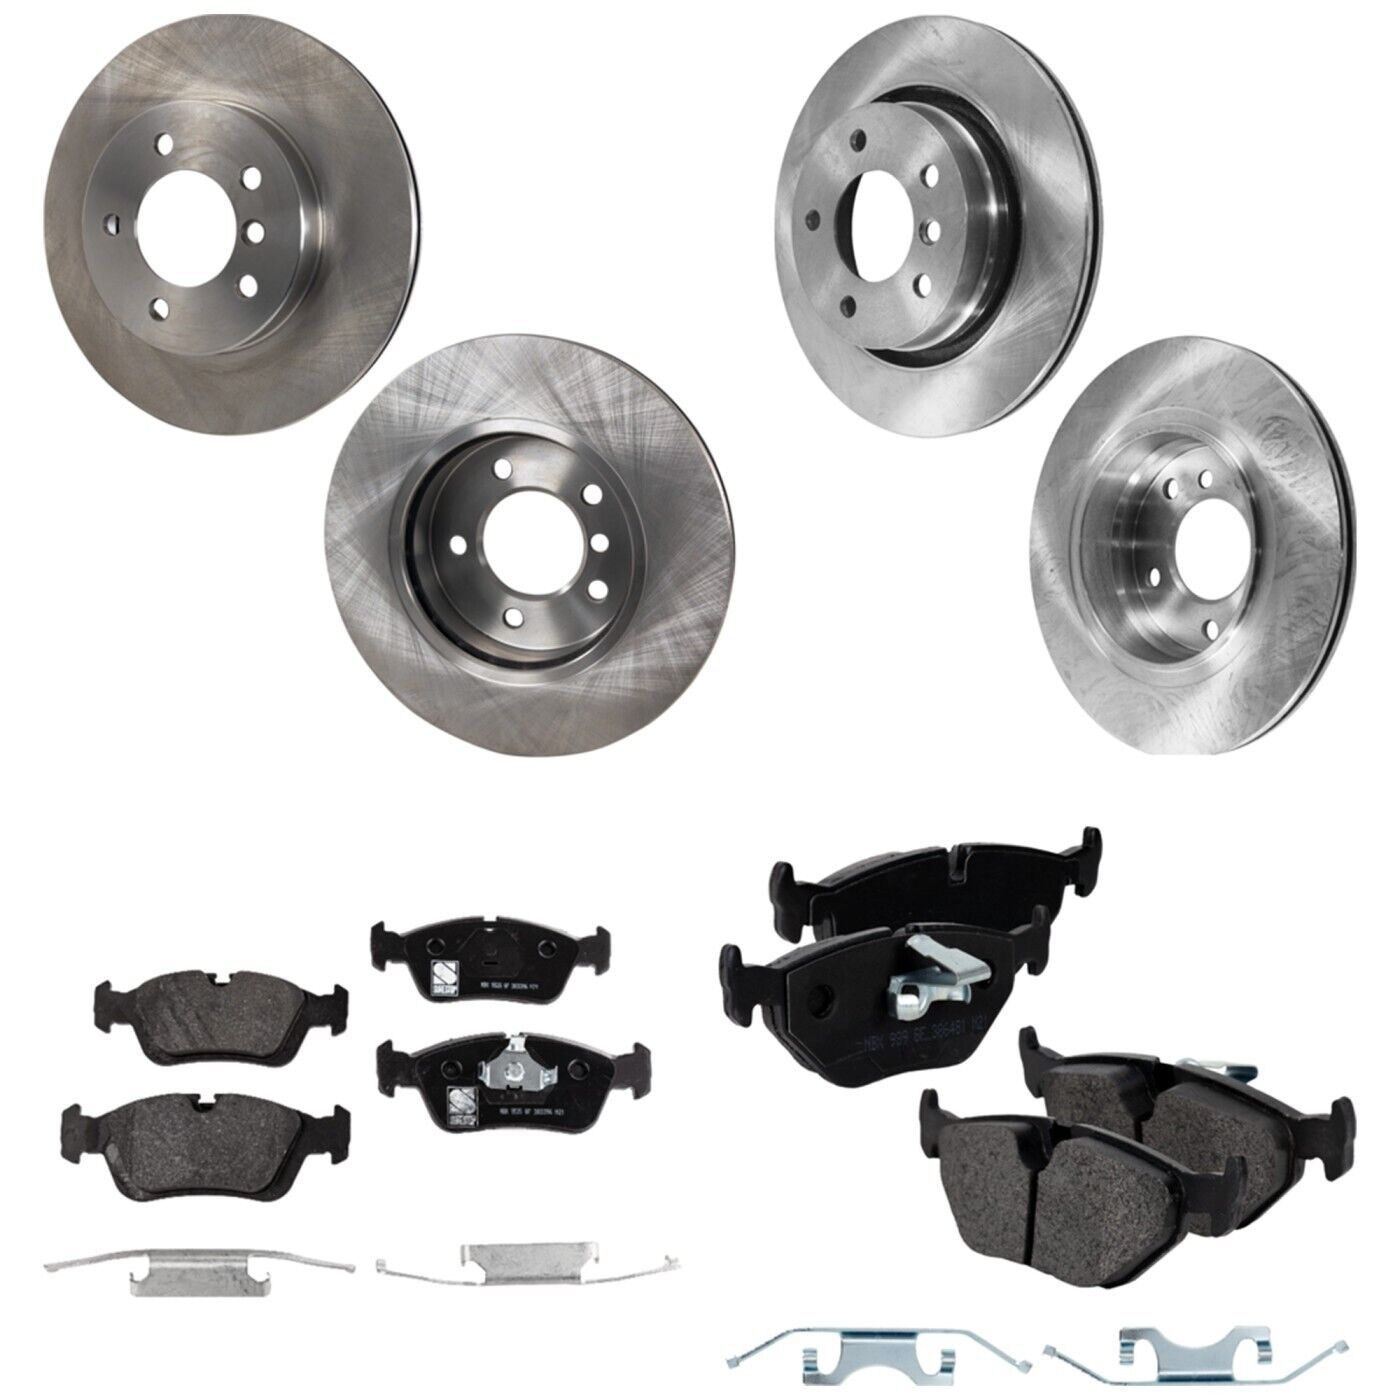 Front & Rear Brake Disc Rotors and Pads Kit for 328 E46 3 Series BMW 328i 328Ci